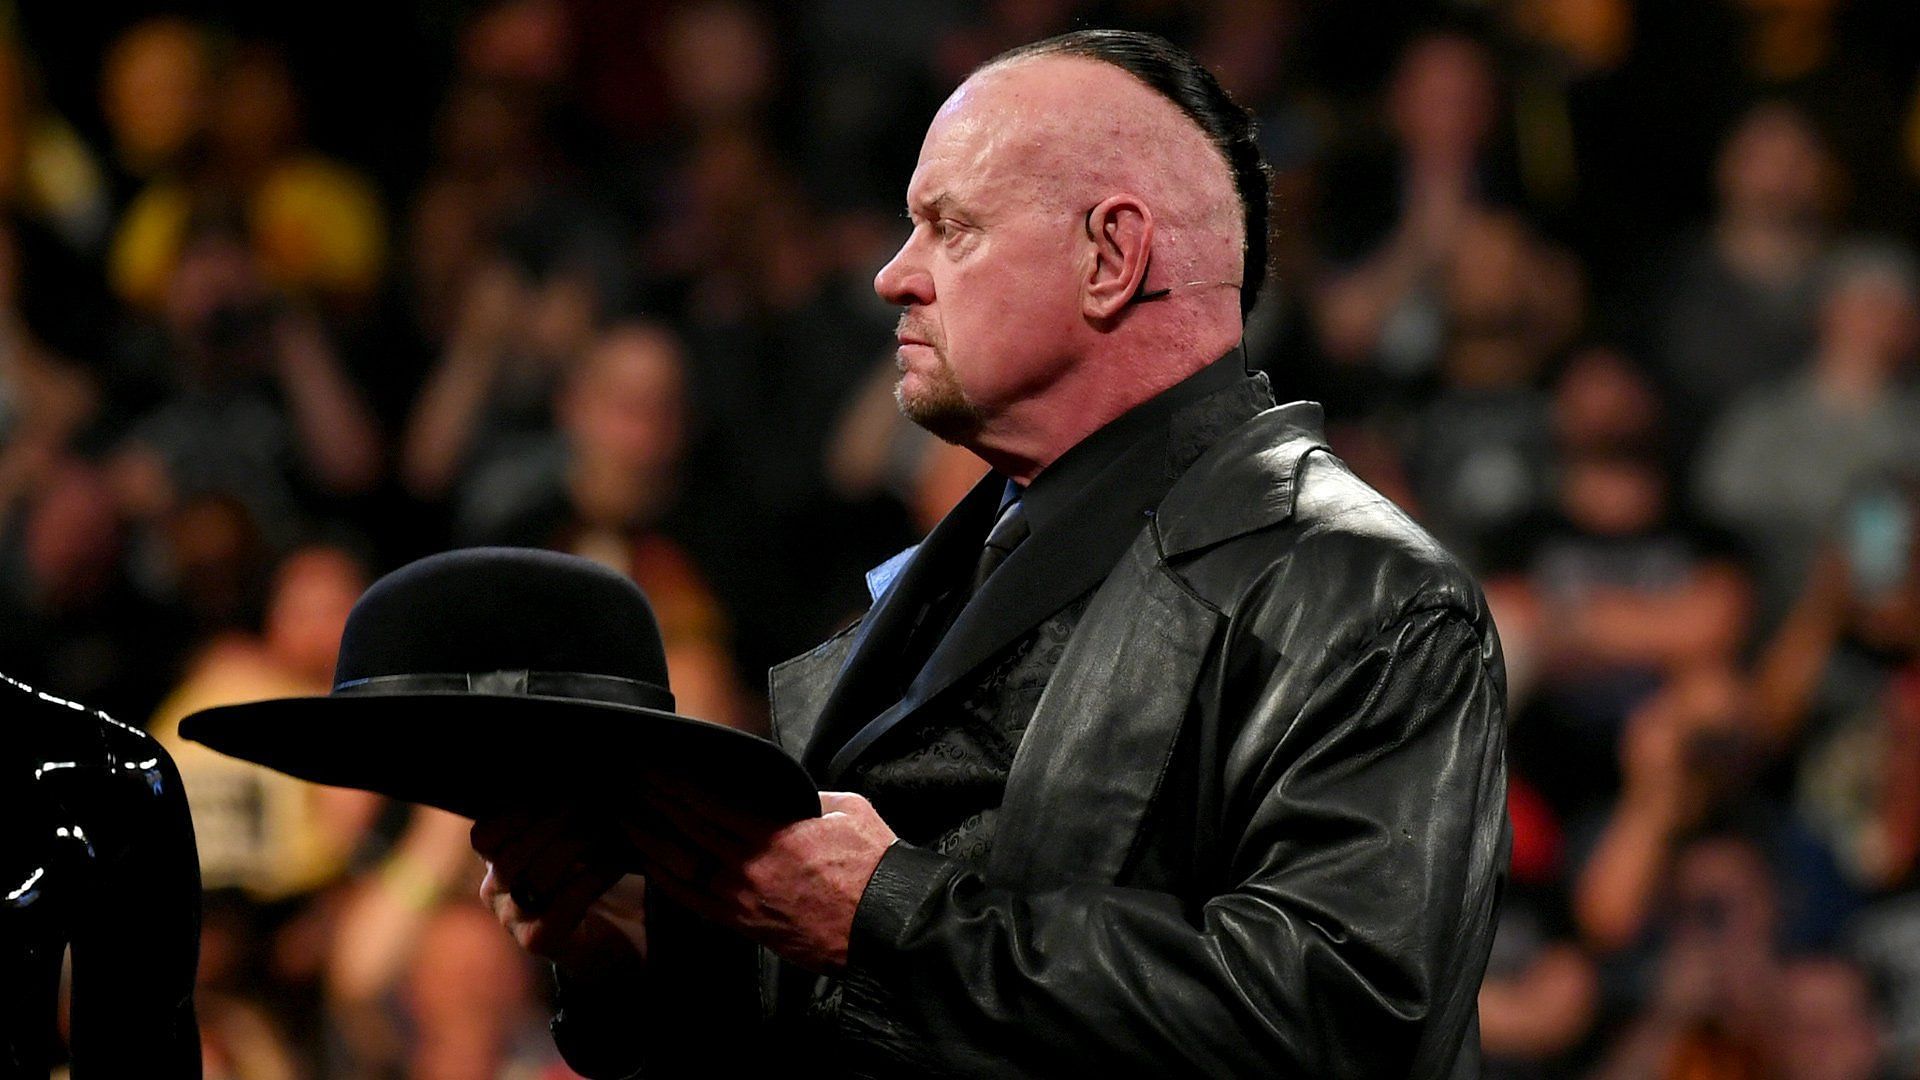 The Undertaker, real name Mark Calaway, joined the WWE Hall of Fame in 2022